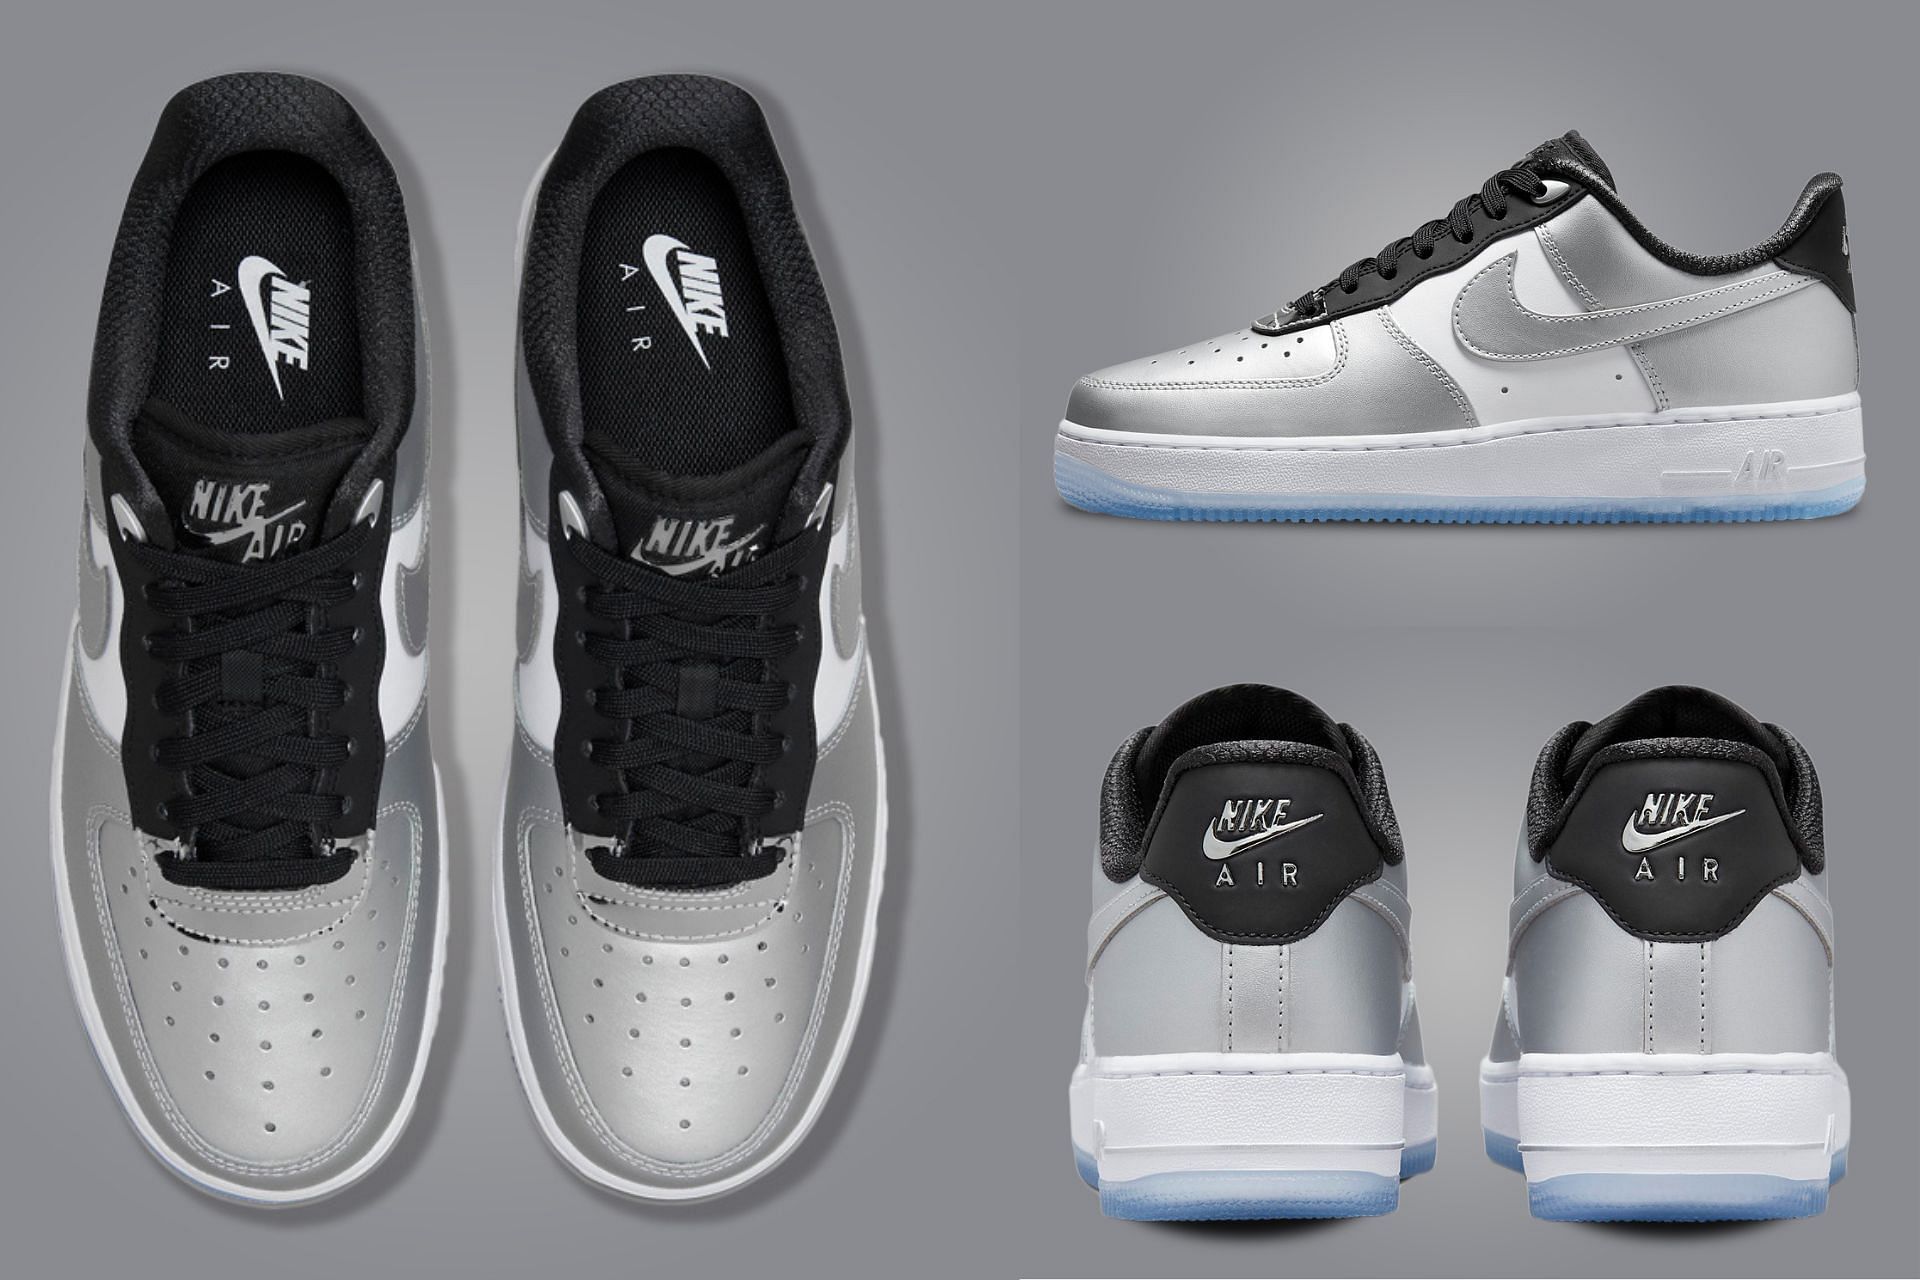 Air Force 1: Nike Air Force 1 '07 Low “Metallic Silver Black” shoes: Where  to buy, price, and more details explored